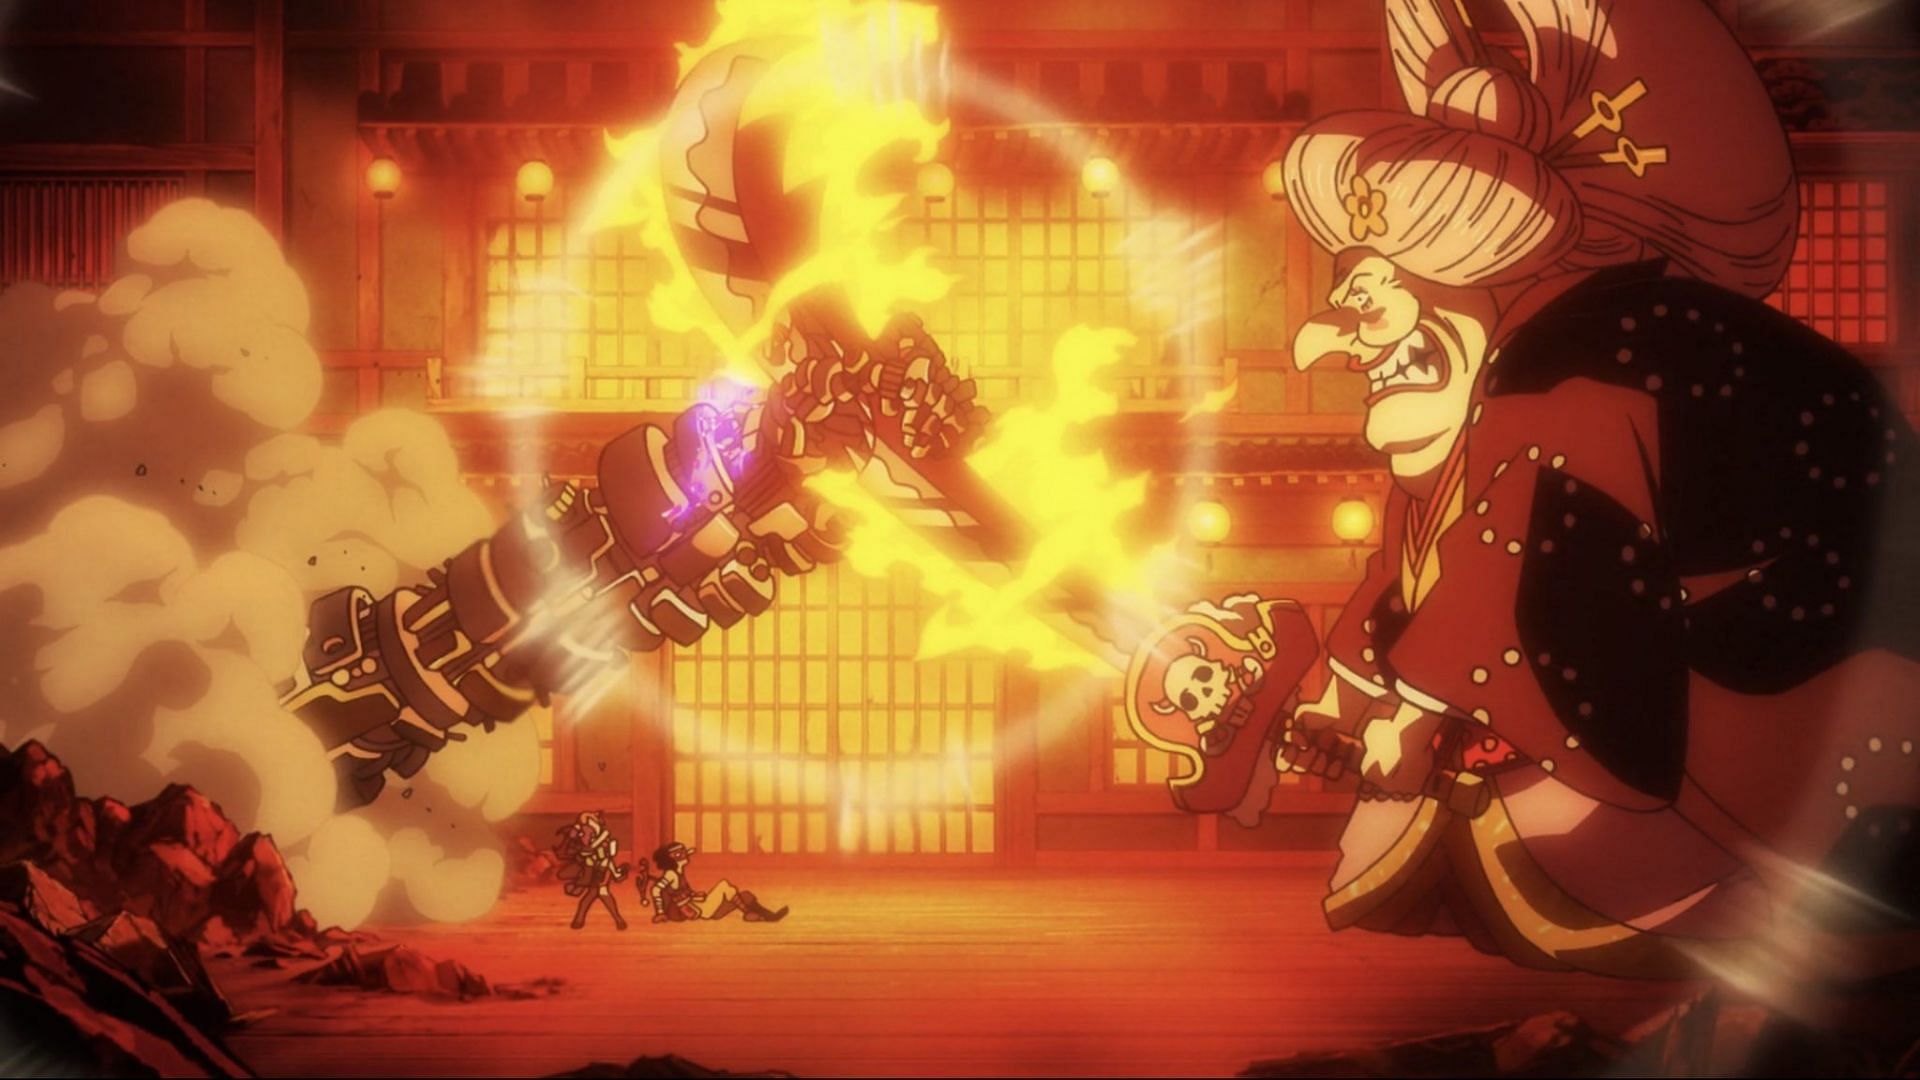 The battle between Kid and Big Mom will soon commence (Image via Toei Animation)